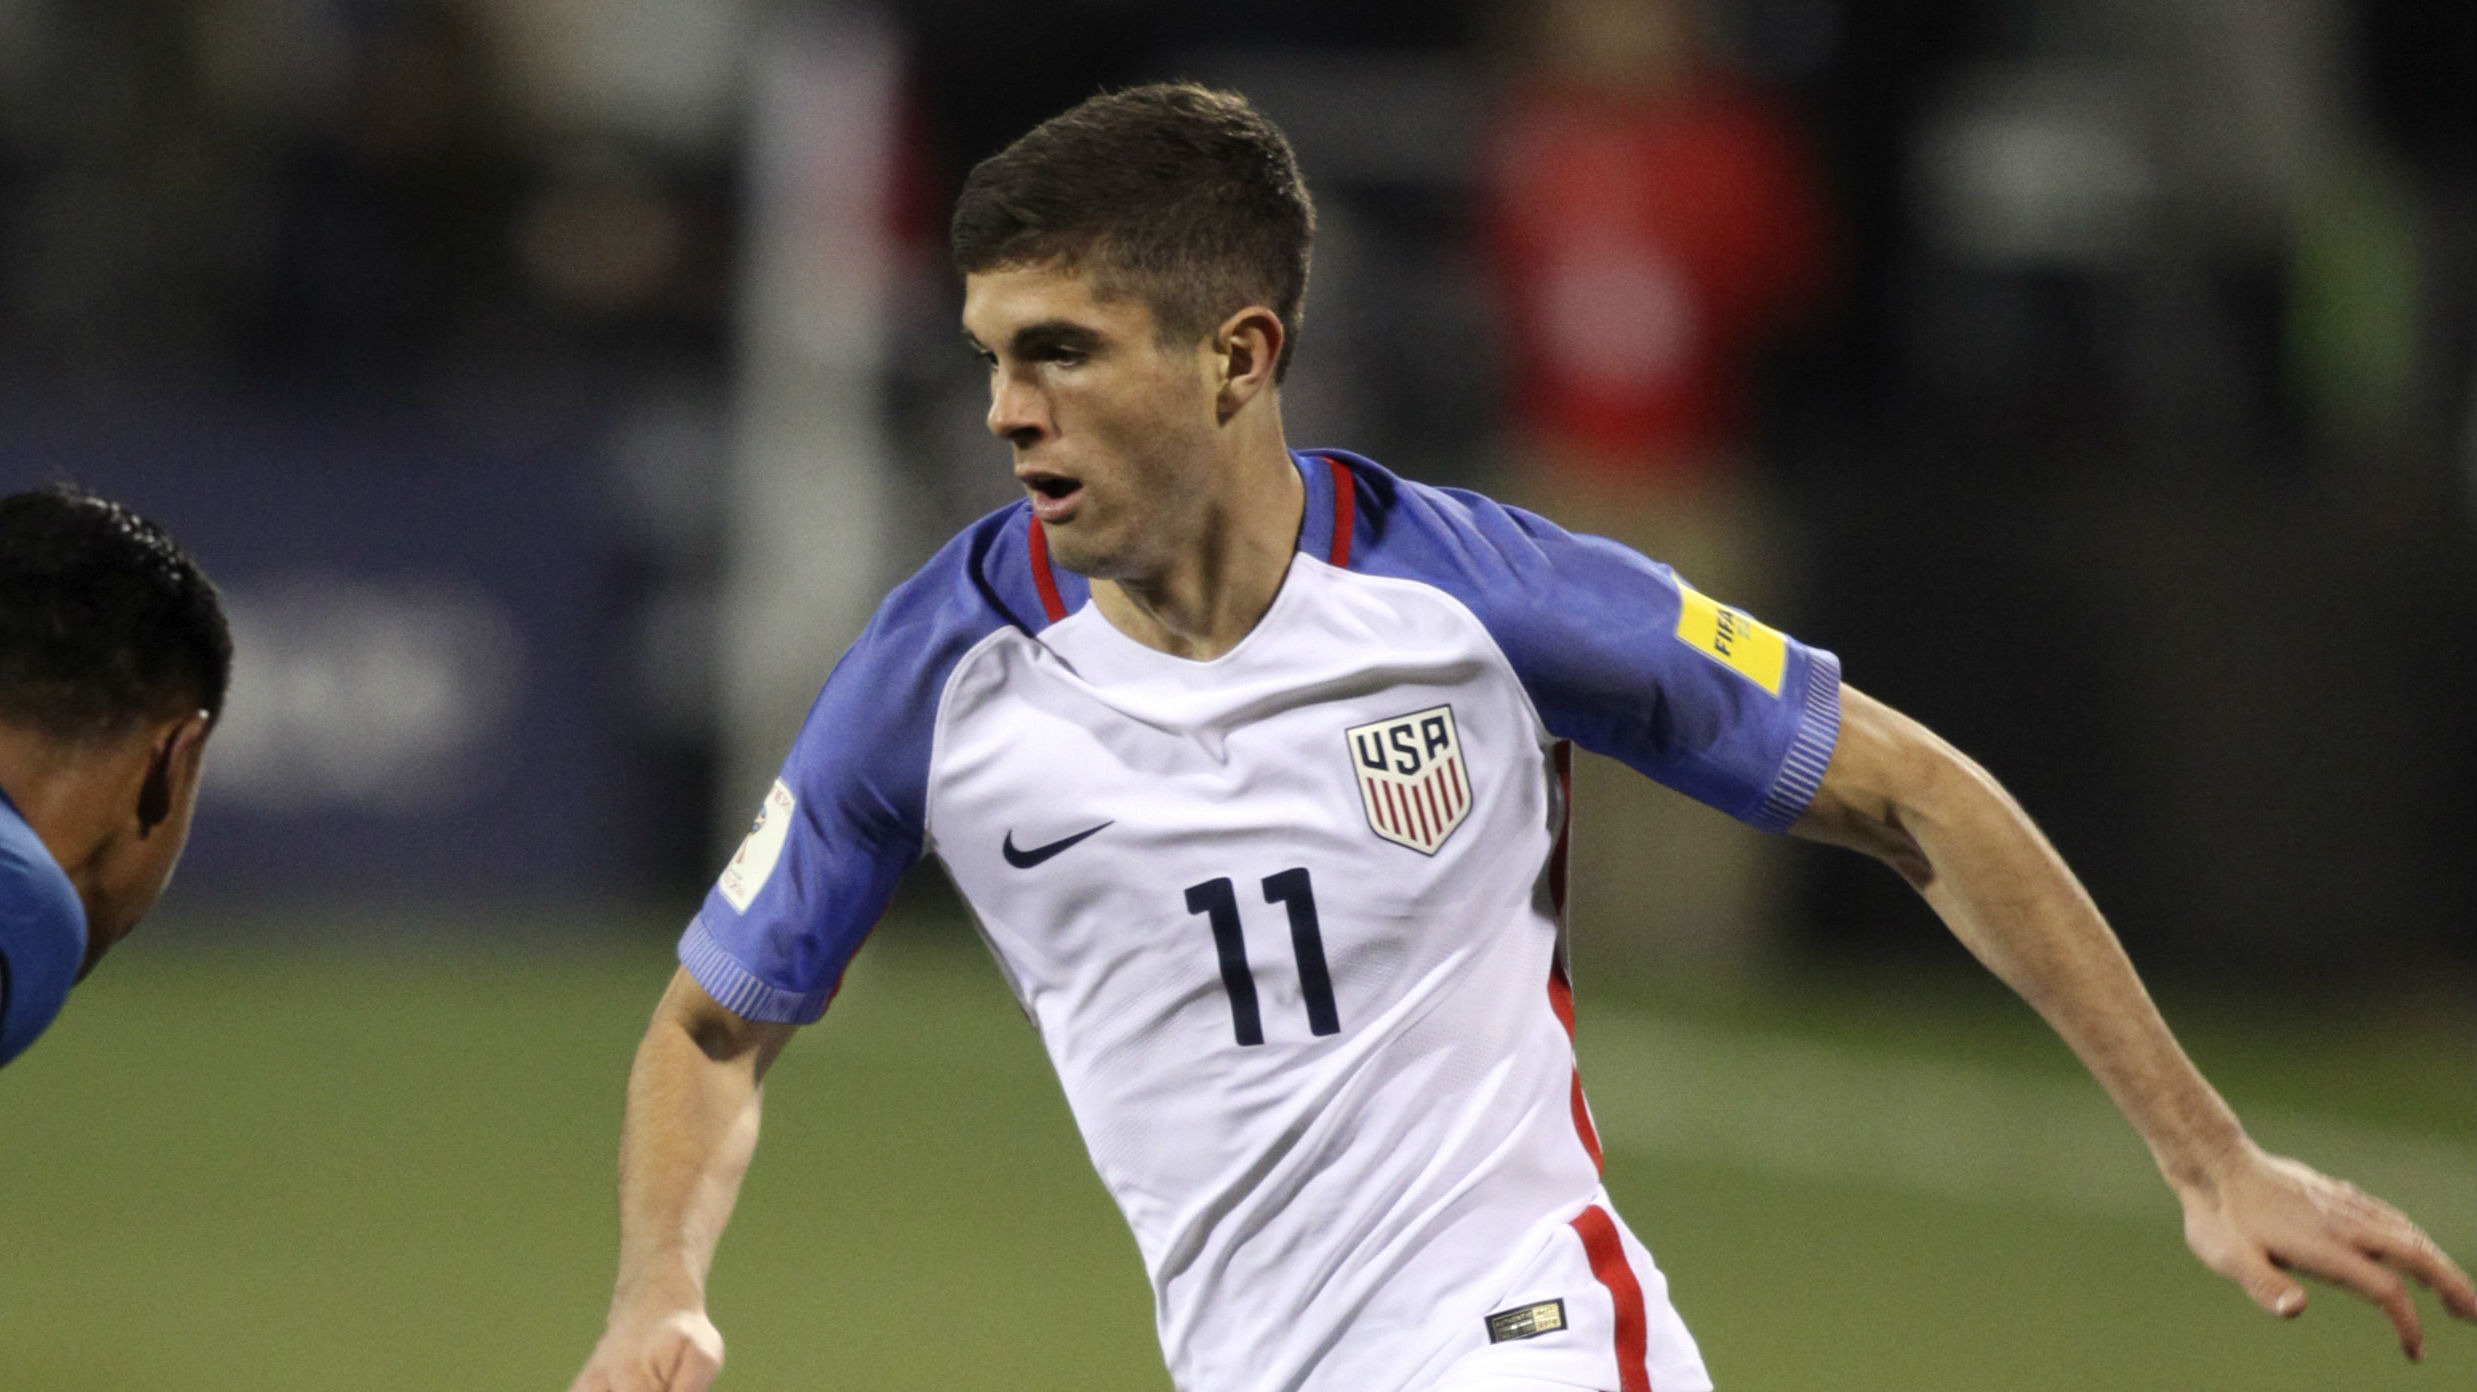 RUMORS: Christian Pulisic wanted by Liverpool, Real Madrid and Man City